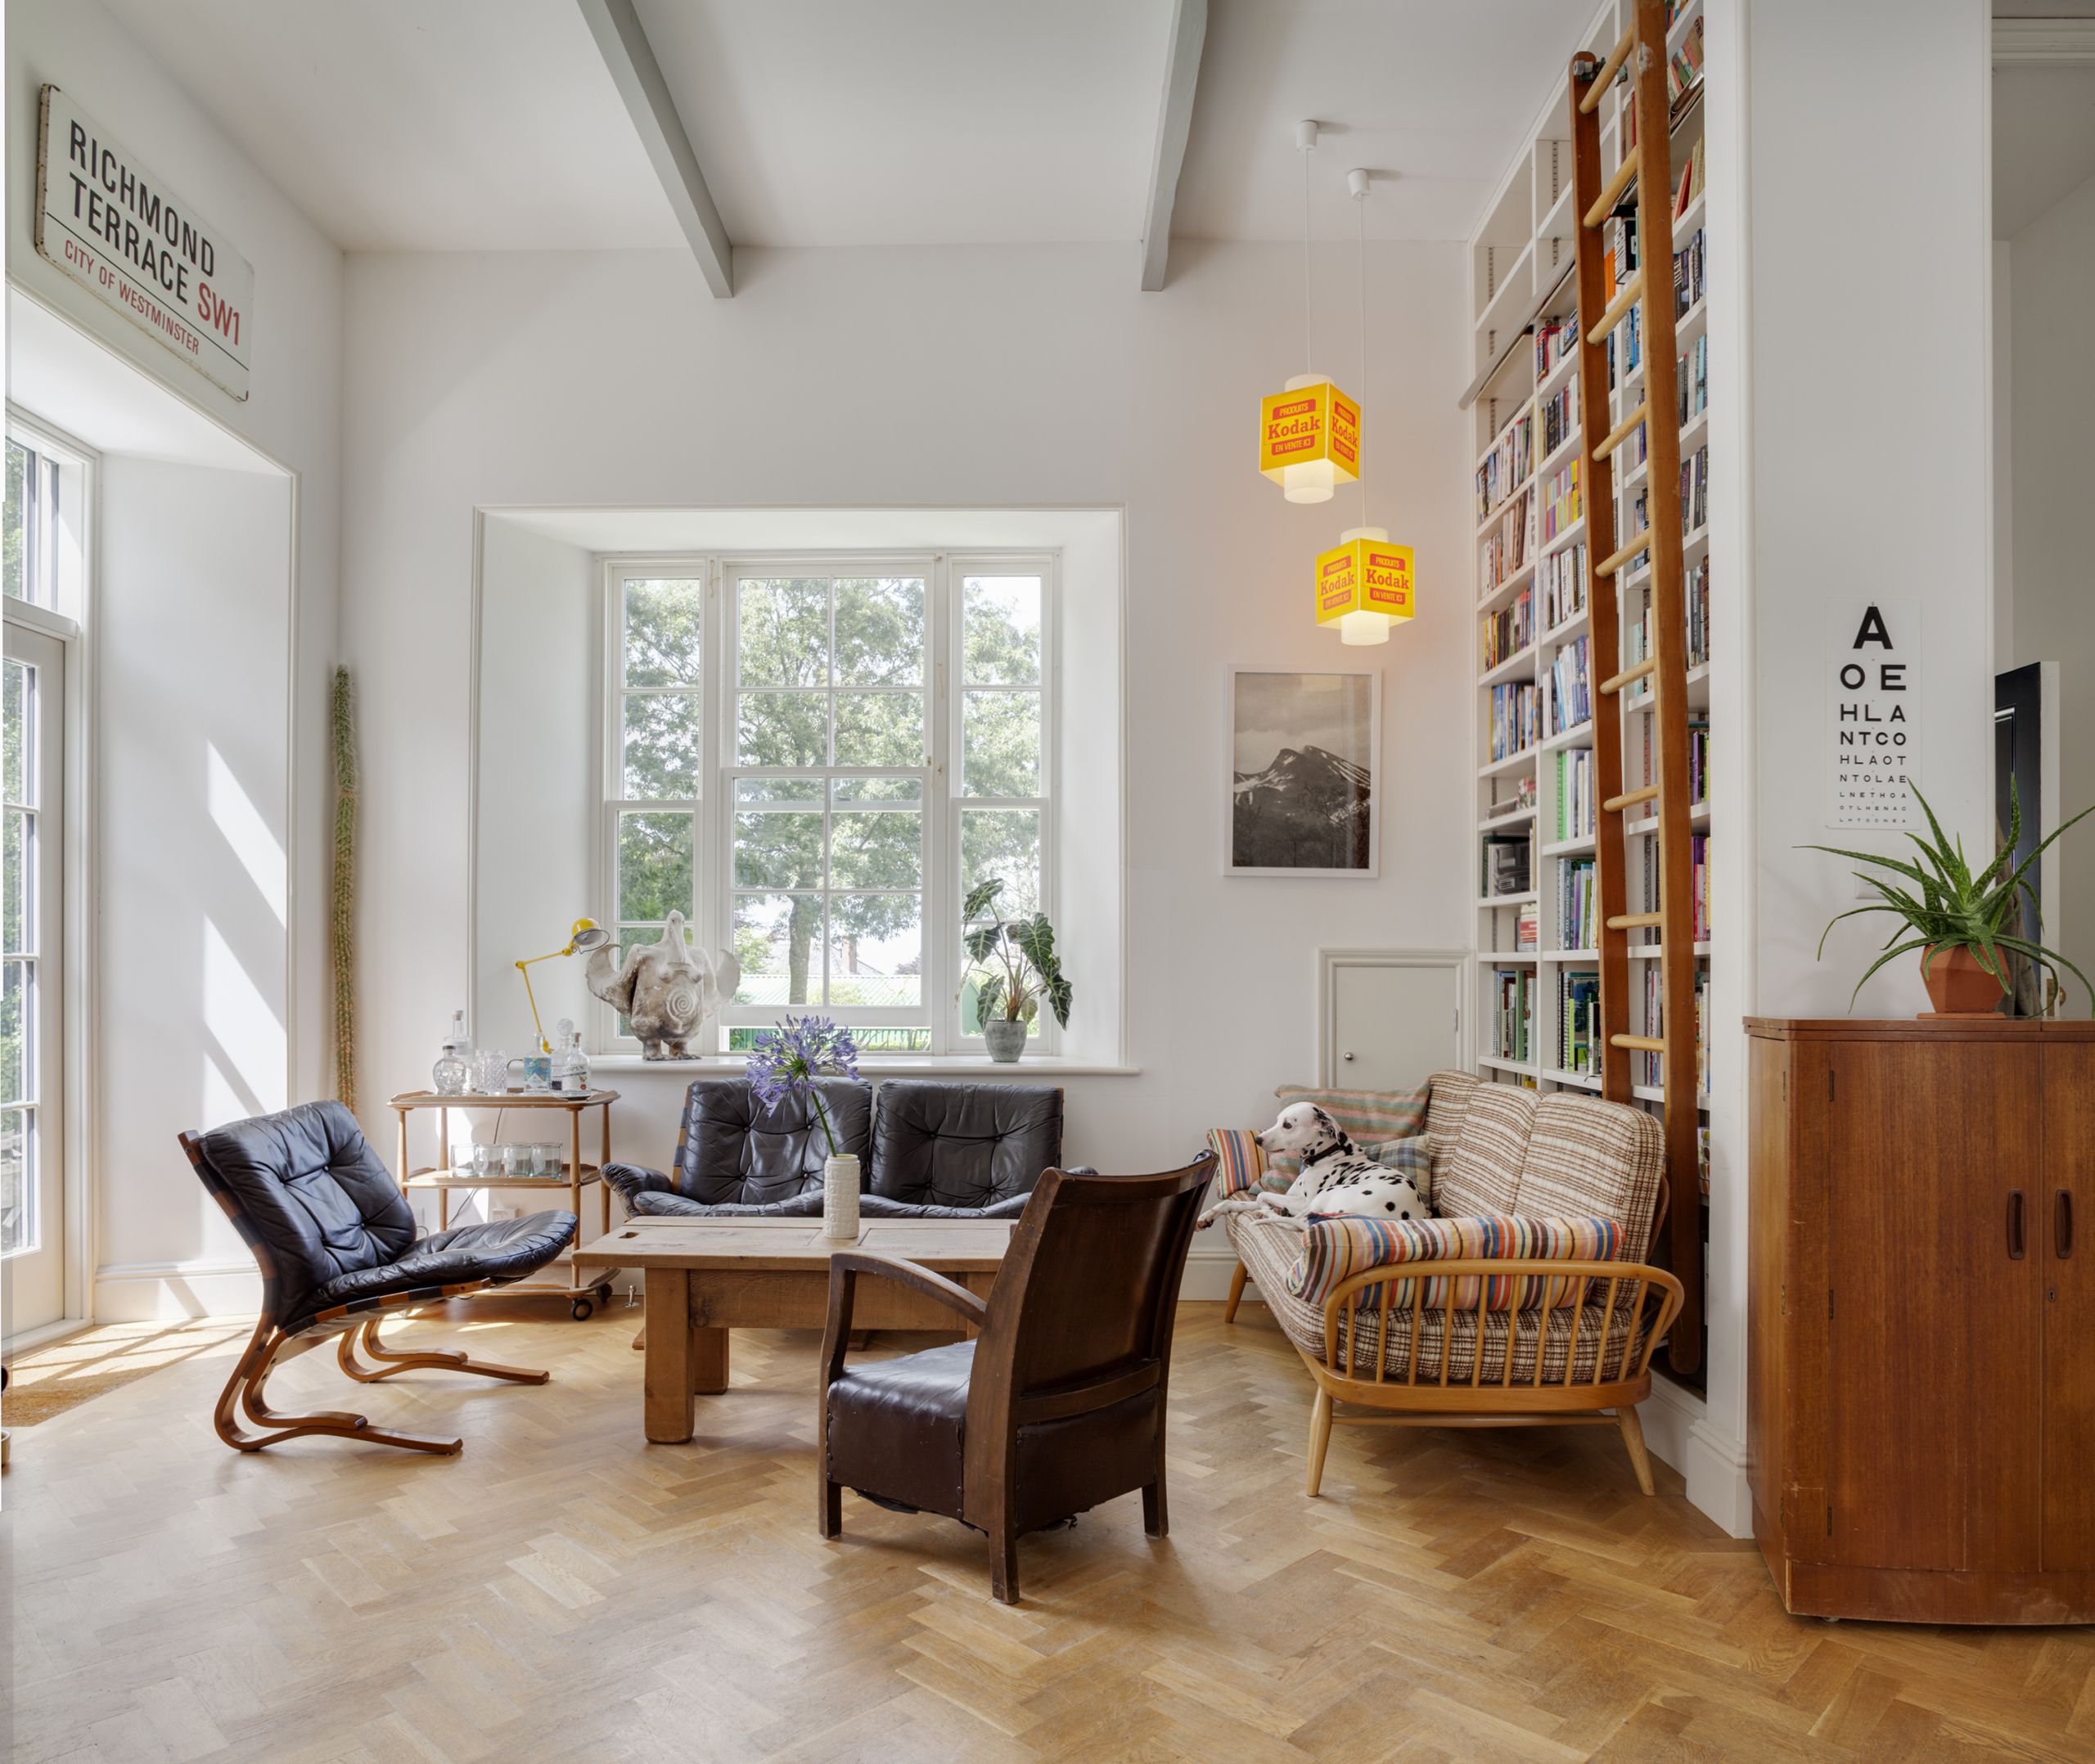 An open plan living room in a renovated school house with home library against the wall and two off-center ceiling lights